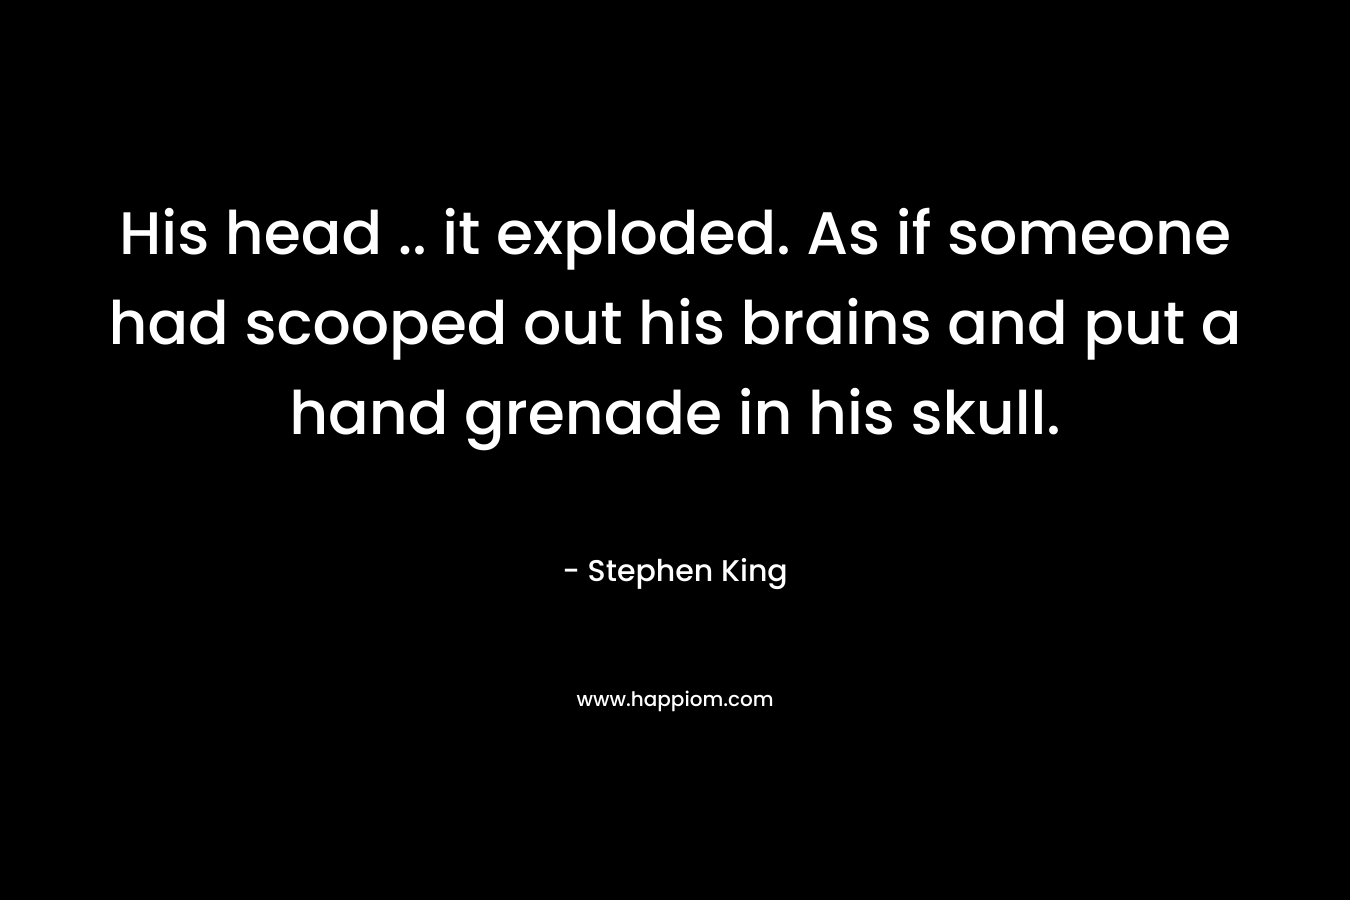 His head .. it exploded. As if someone had scooped out his brains and put a hand grenade in his skull. – Stephen King